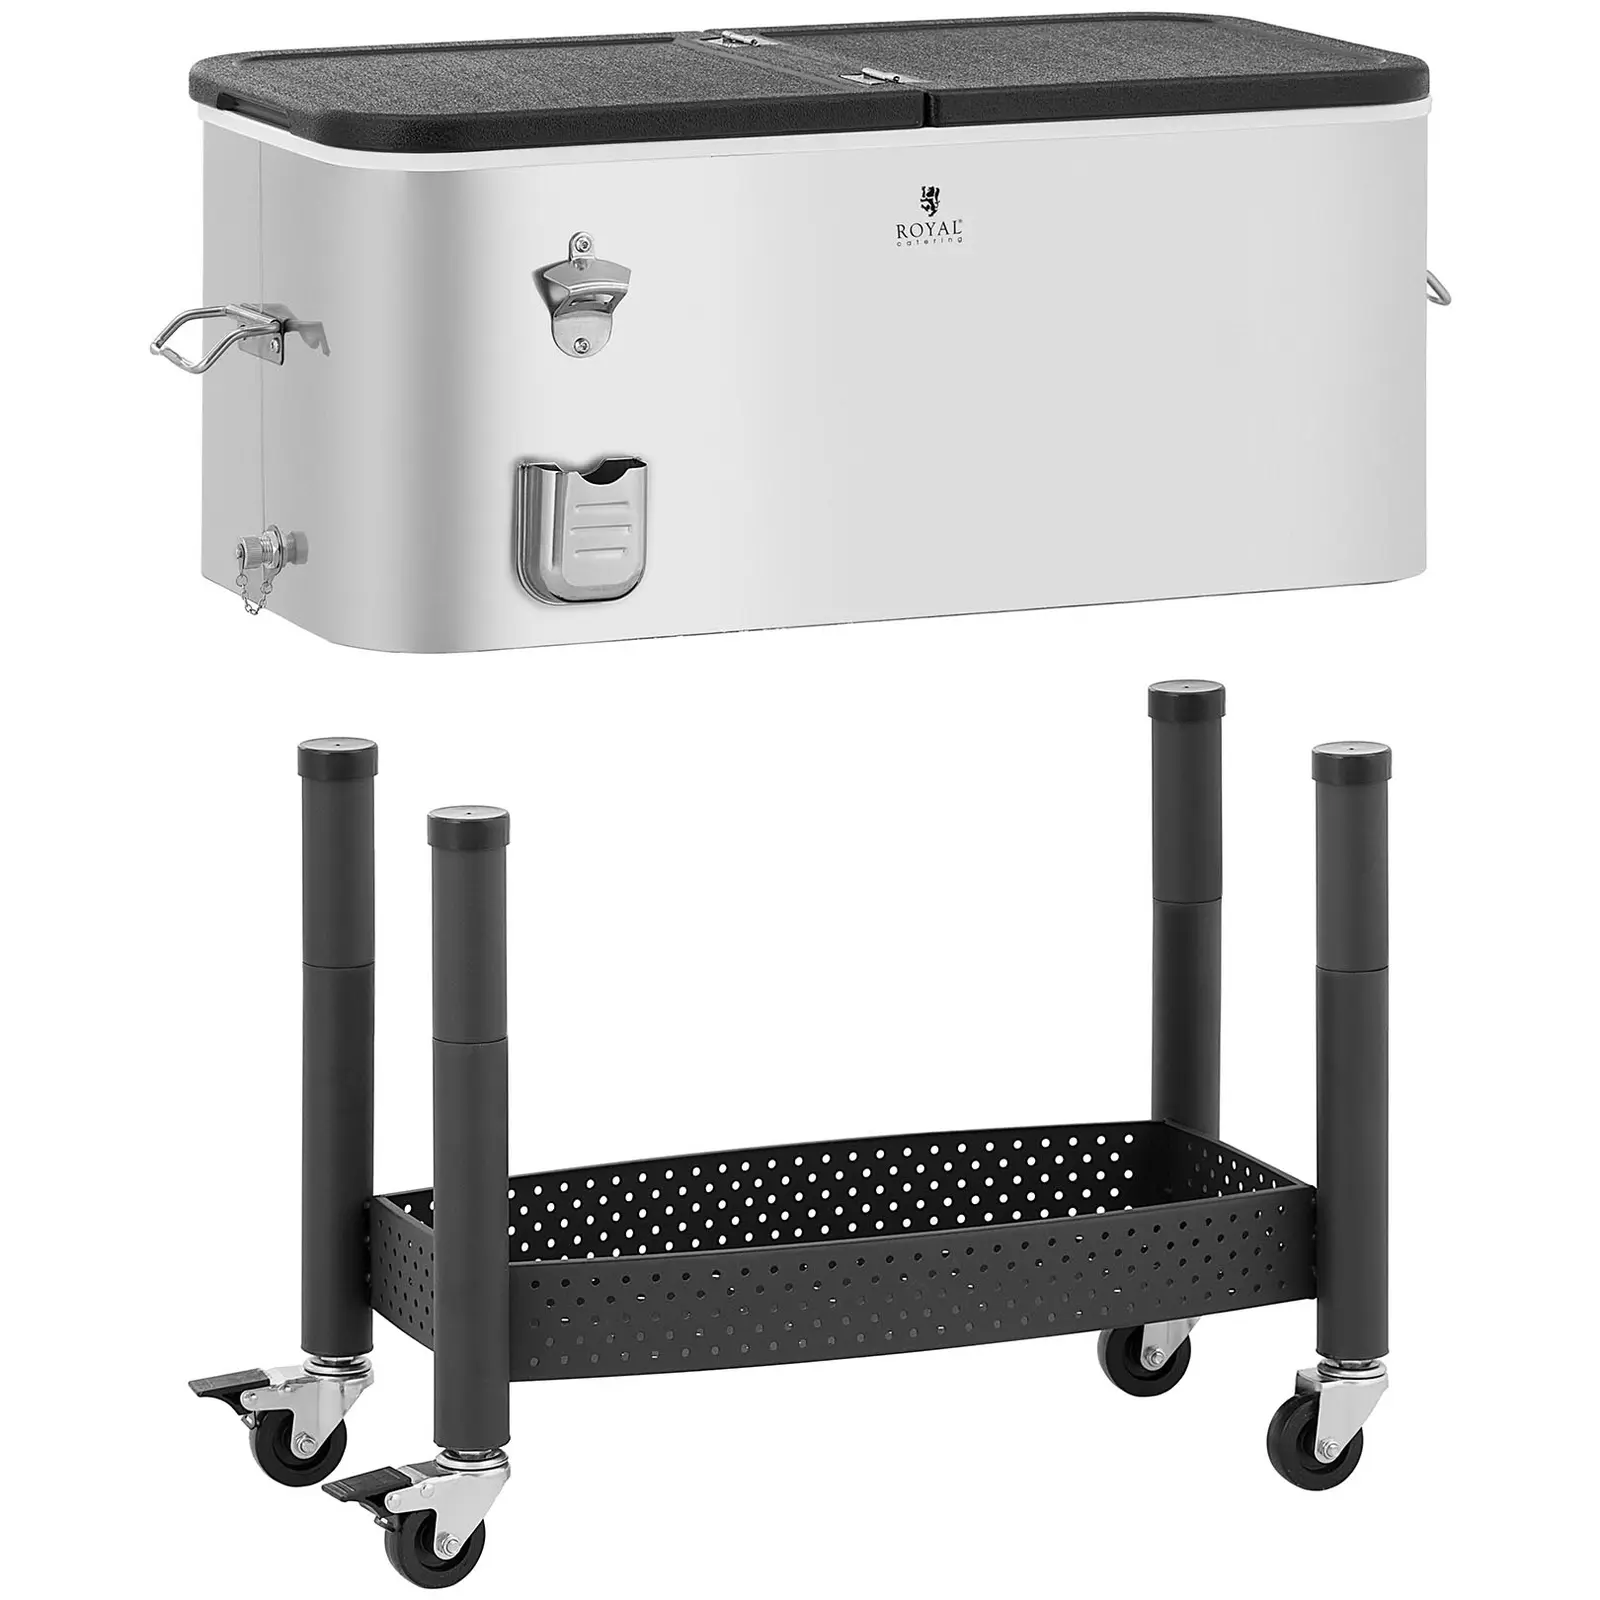 Cool box with chassis - 61 L - Royal Catering